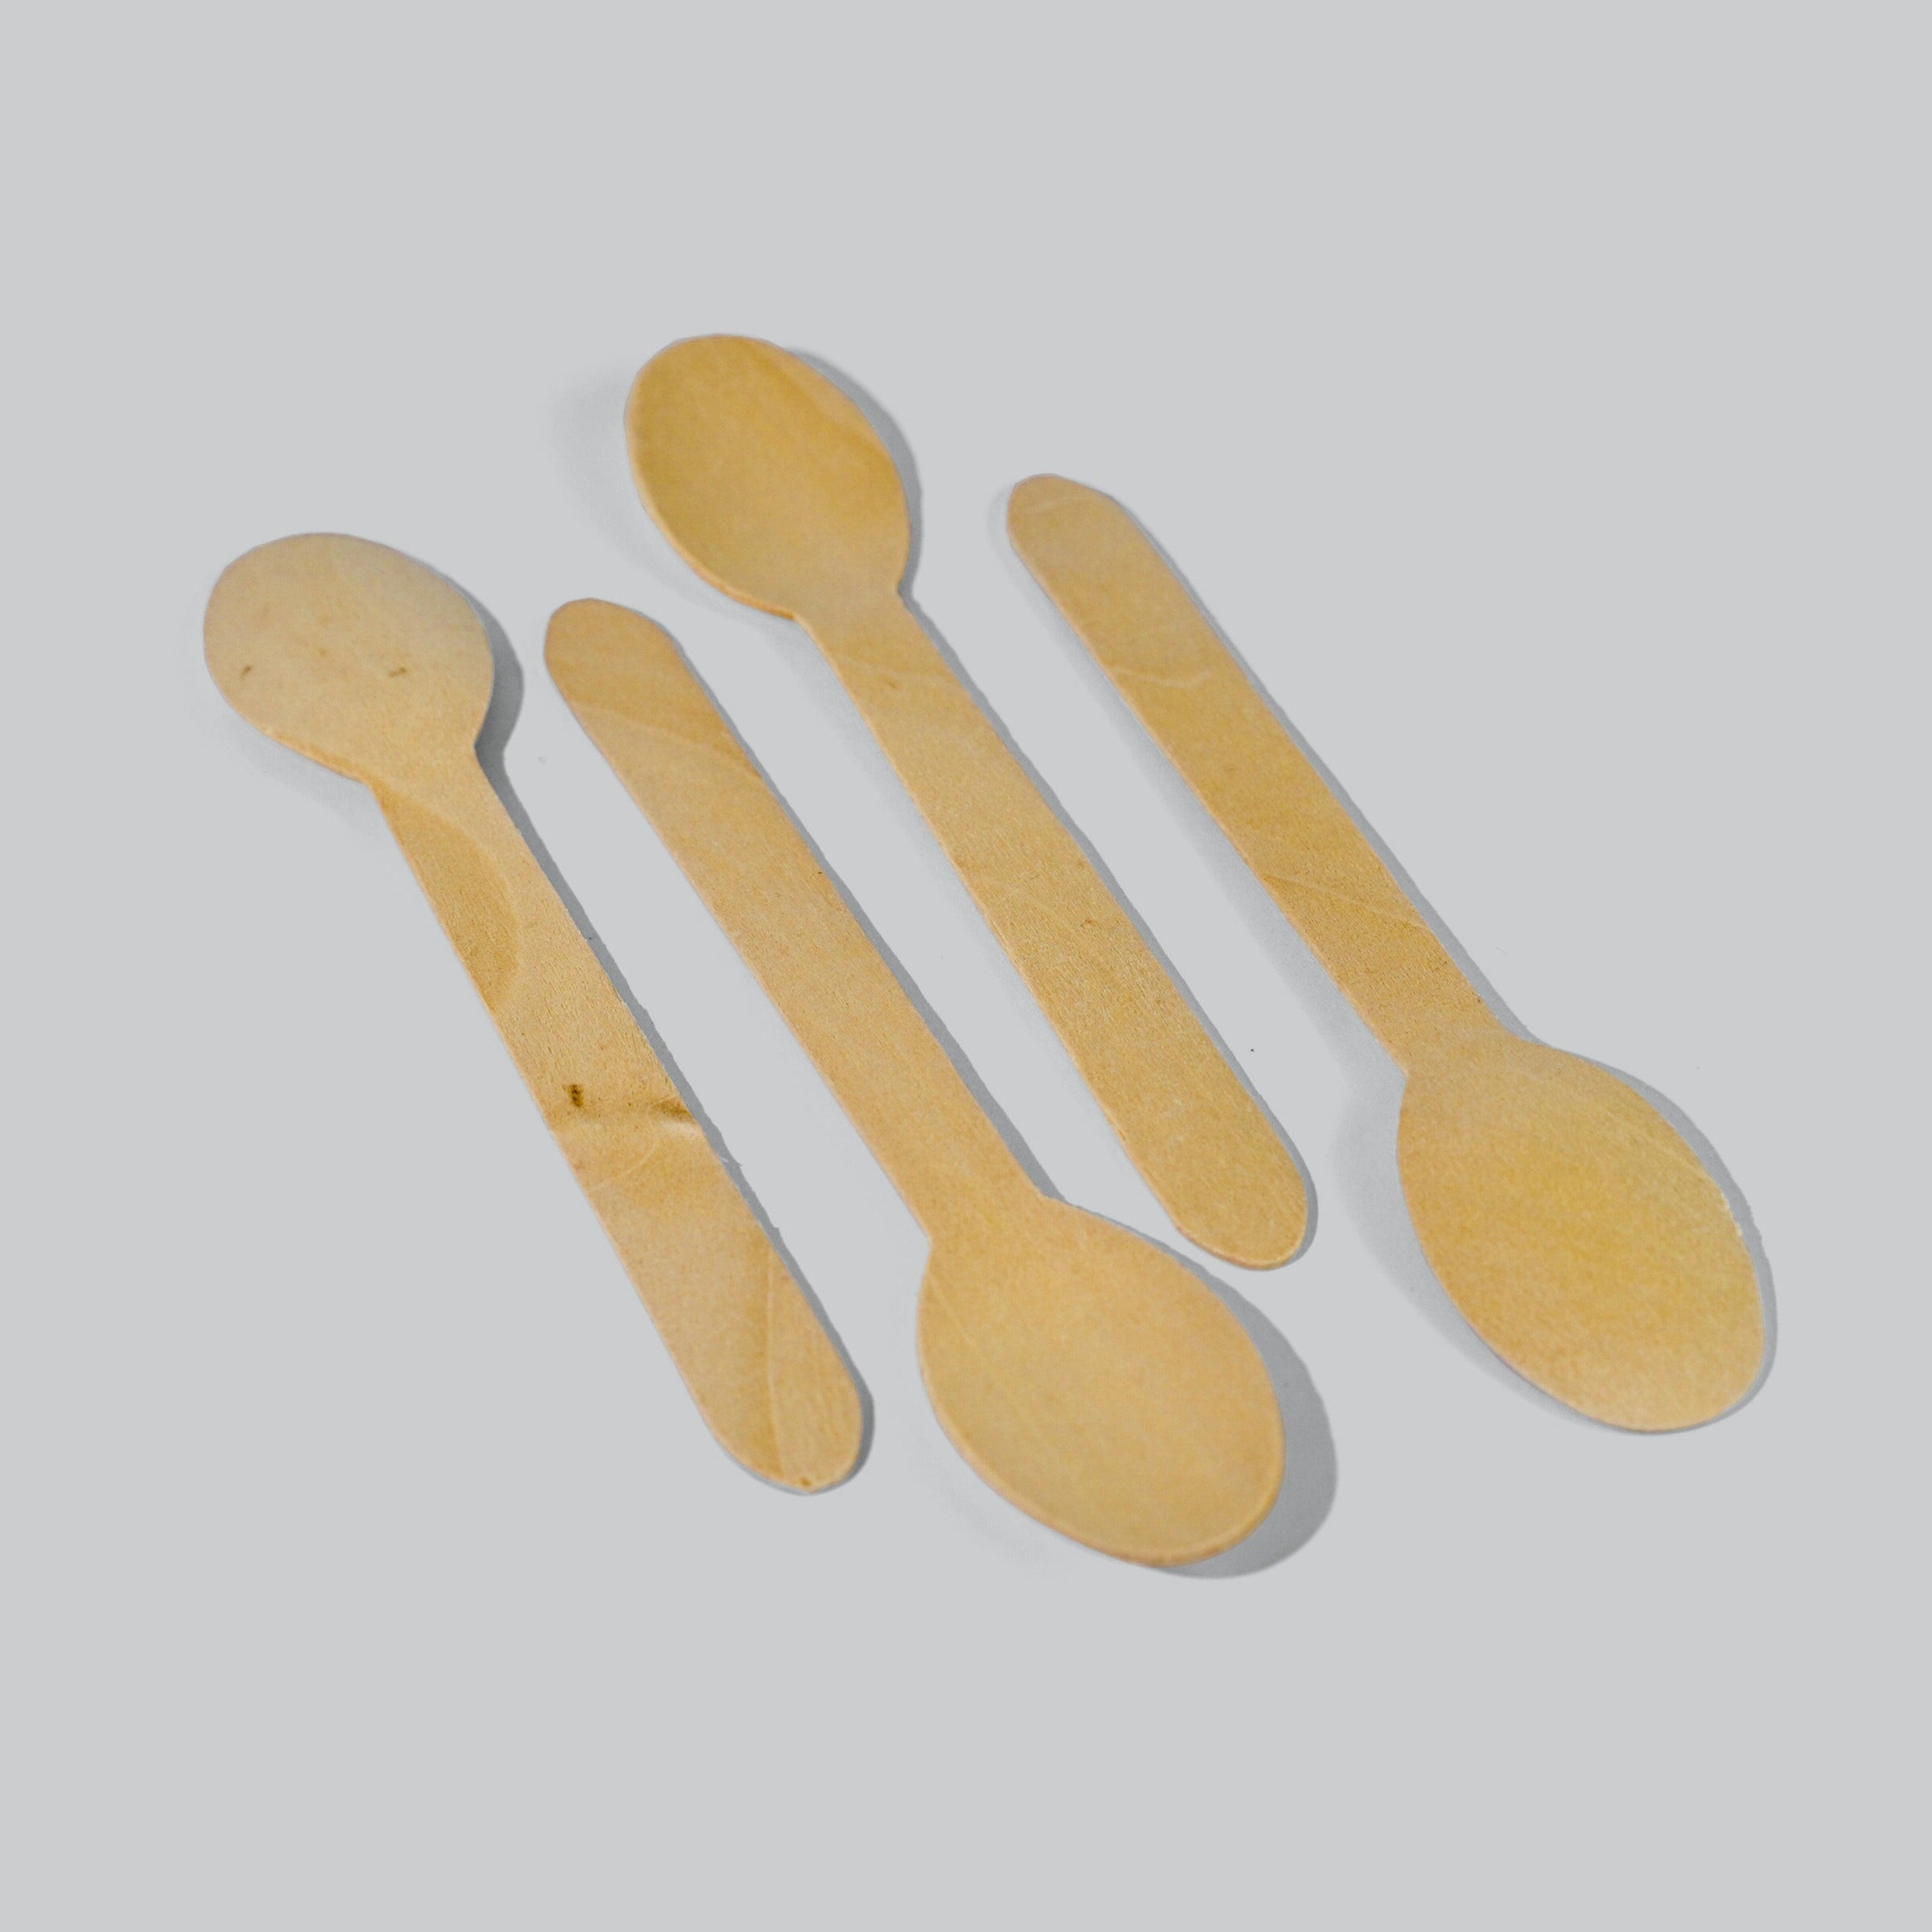 Wooden Spoons (Wholesale/Bulk) - 1000 count by EQUO